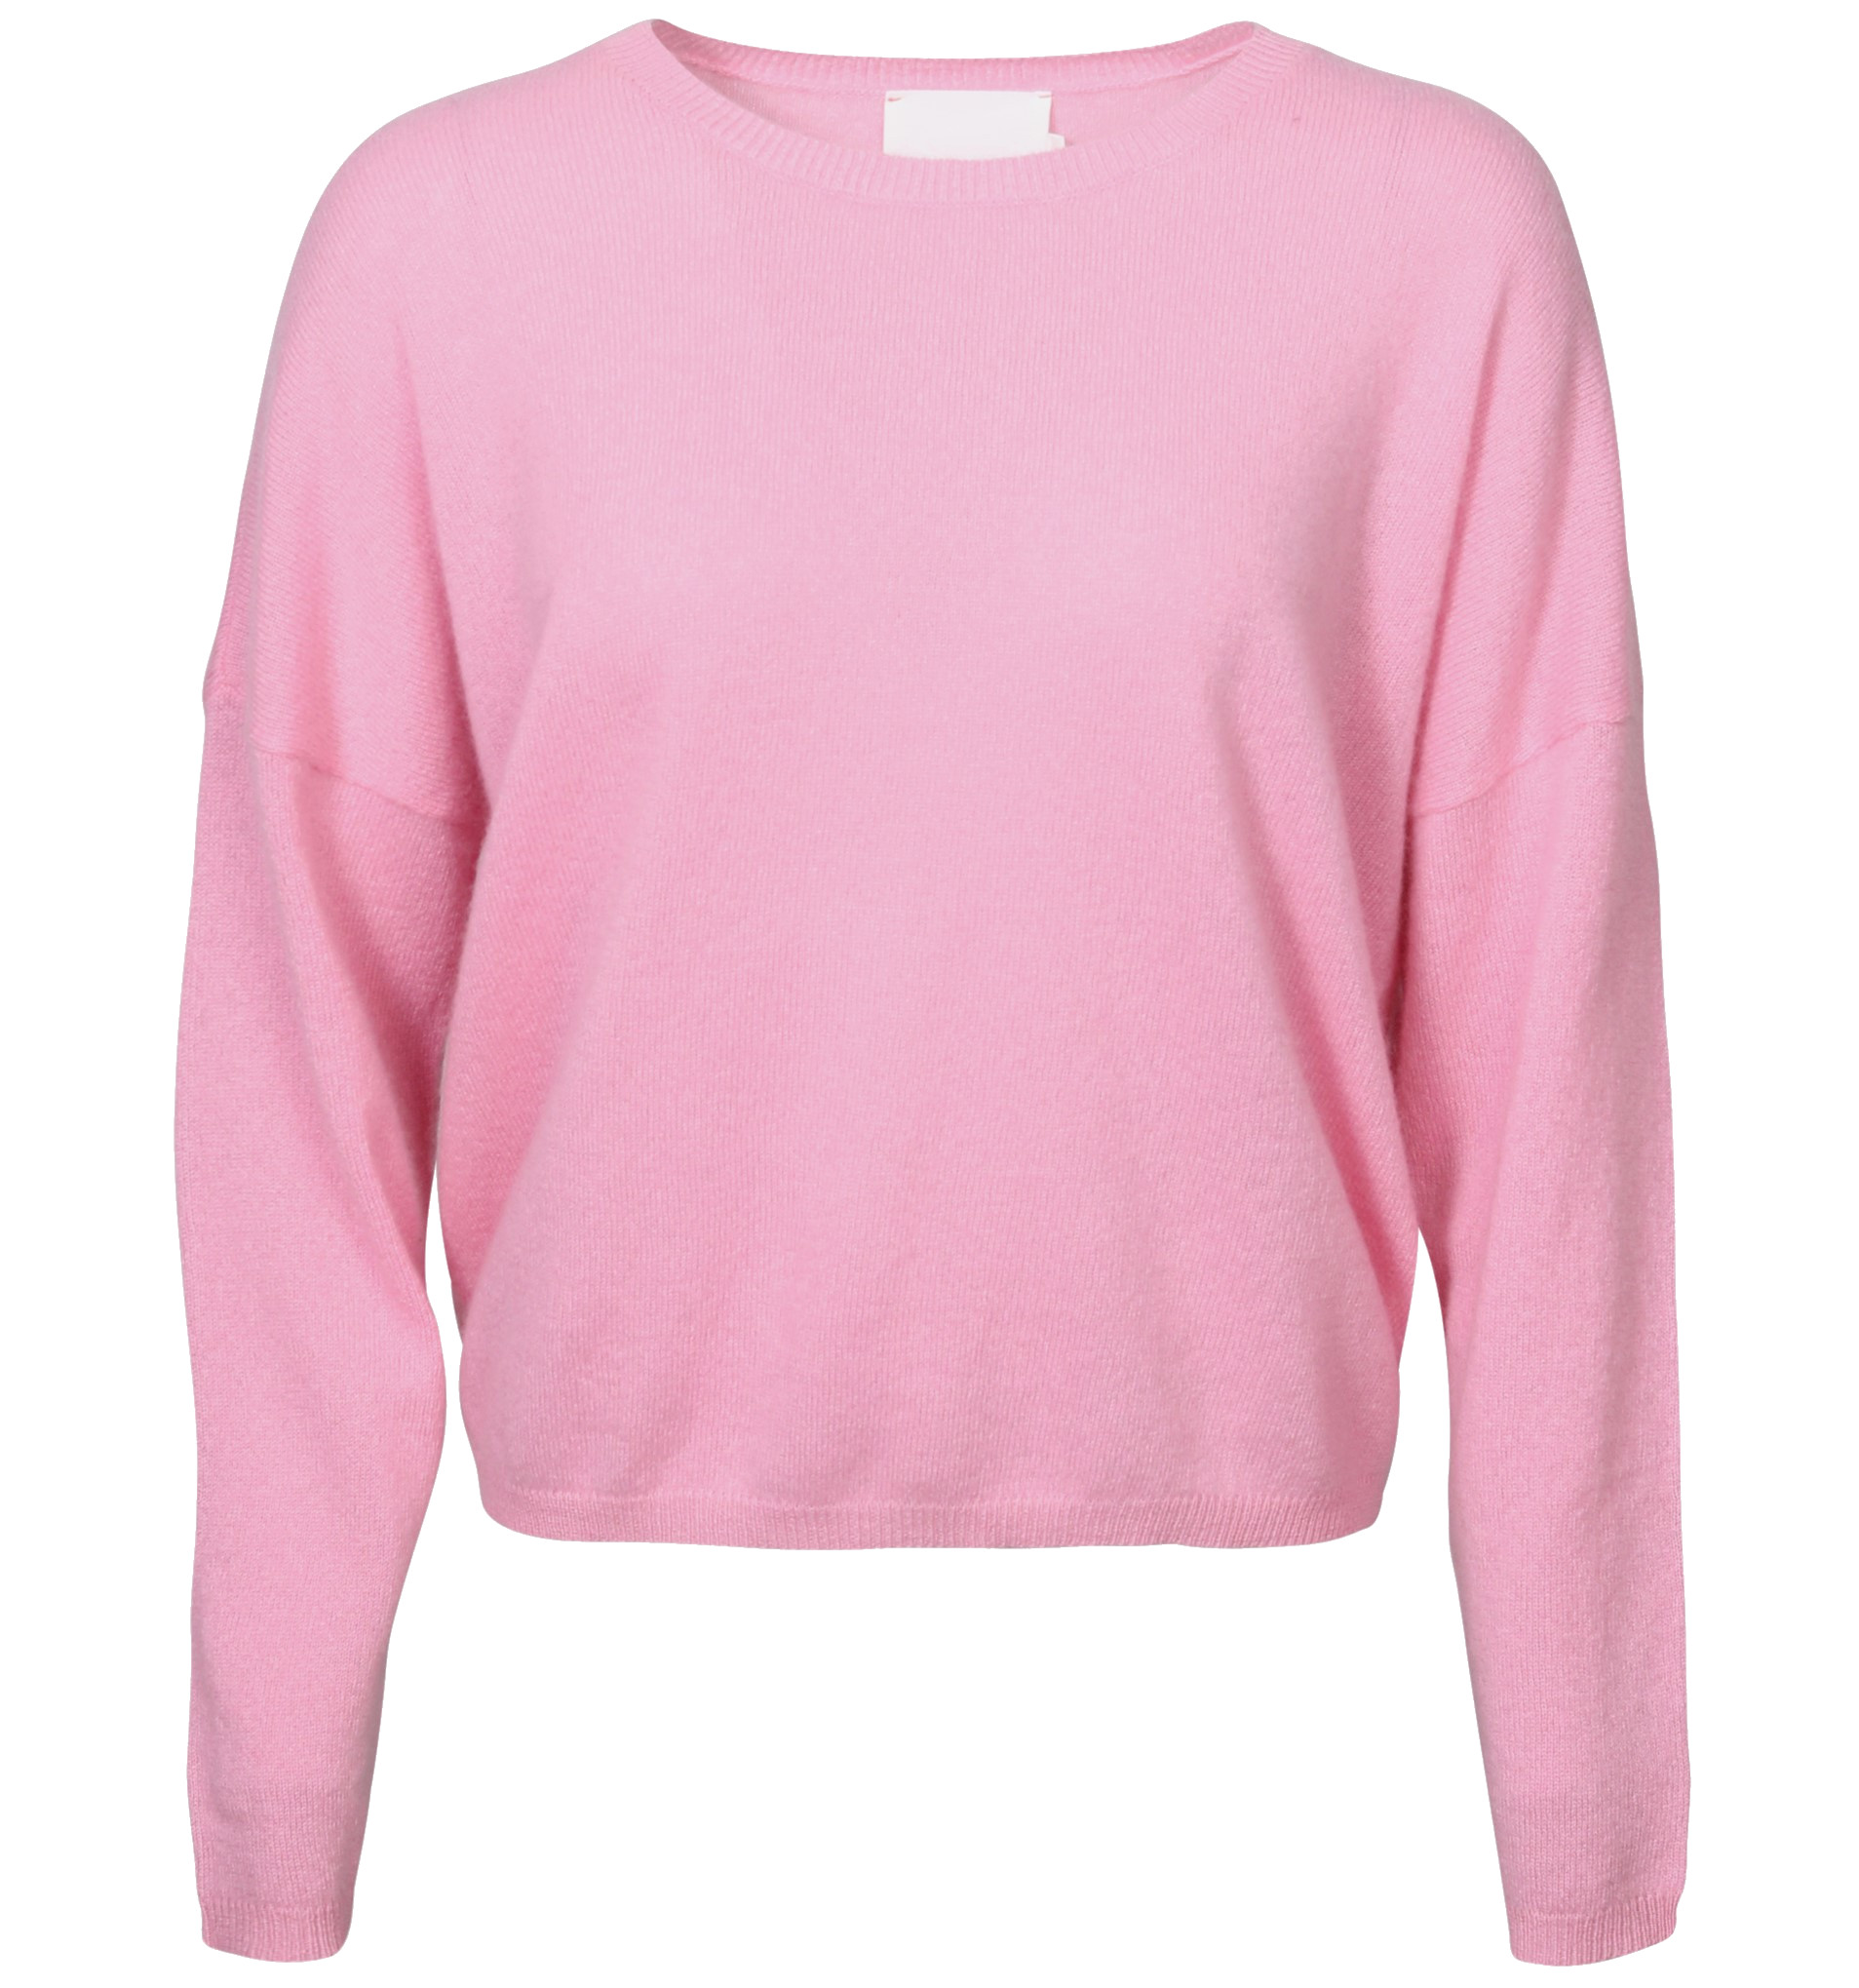 ABSOLUT CASHMERE Round Neck Sweater Kaira in Light Pink XS